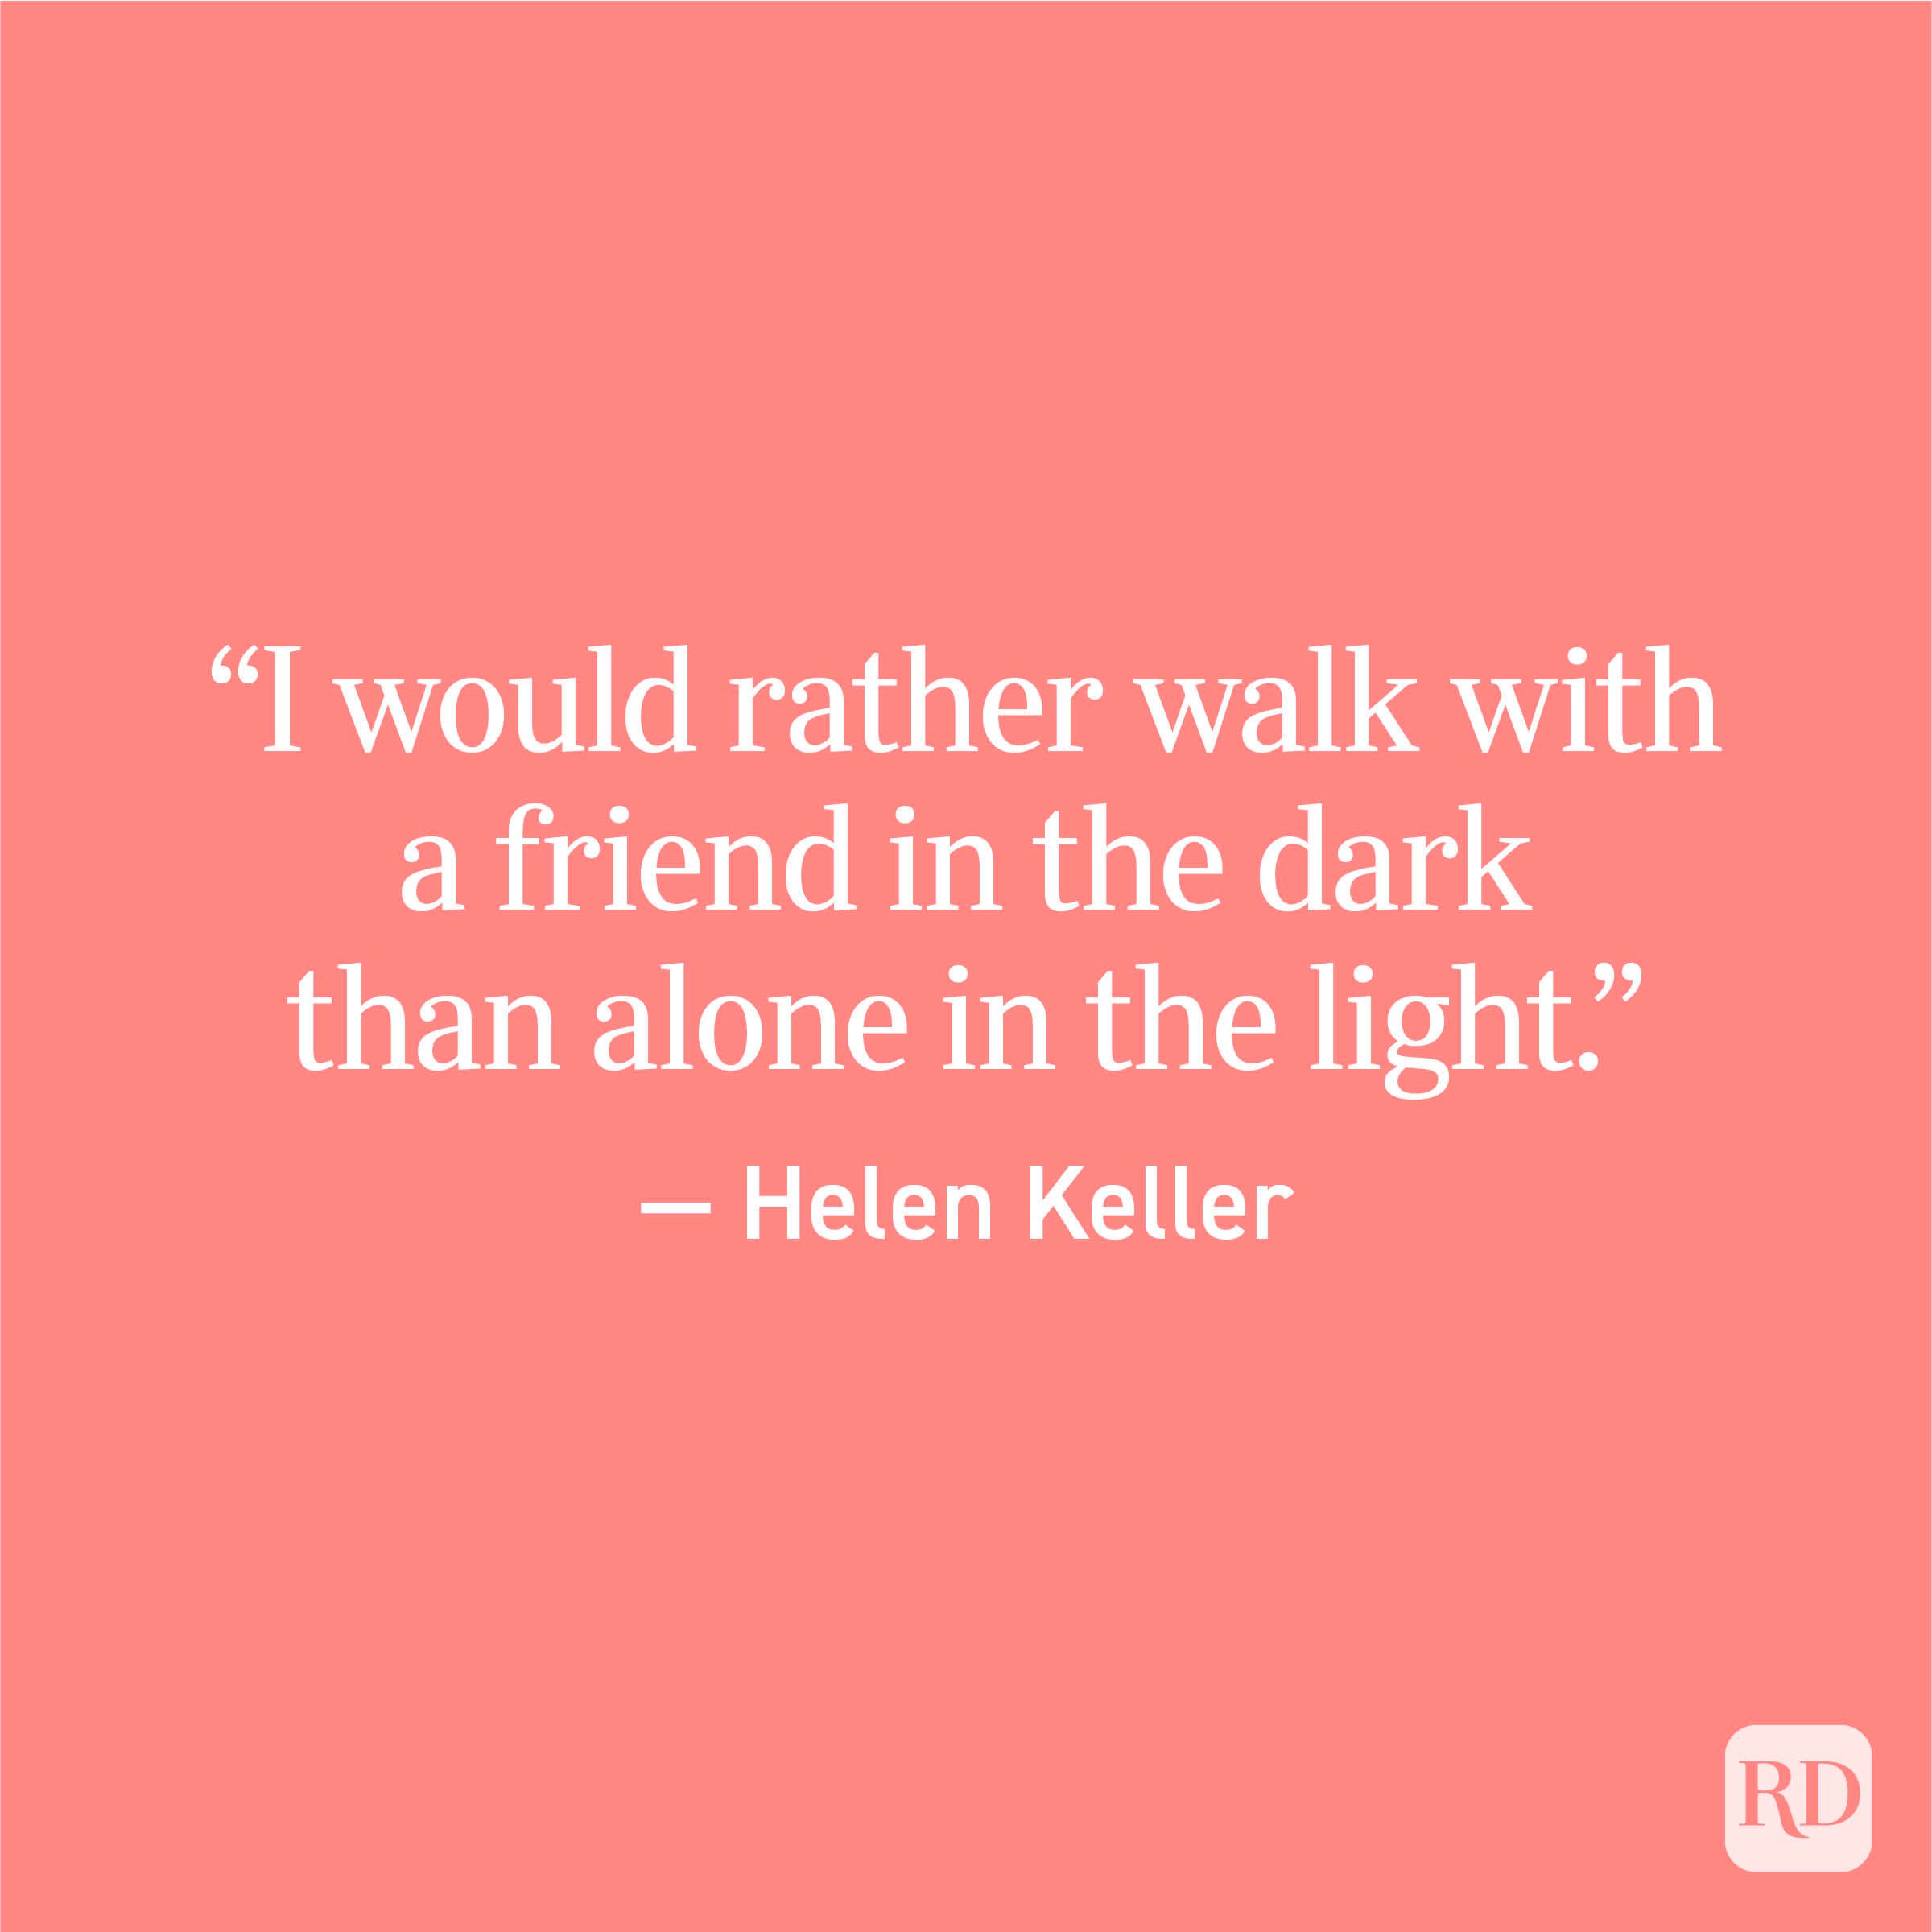 "I would rather walk with a friend in the dark than alone in the light." - Helen Keller